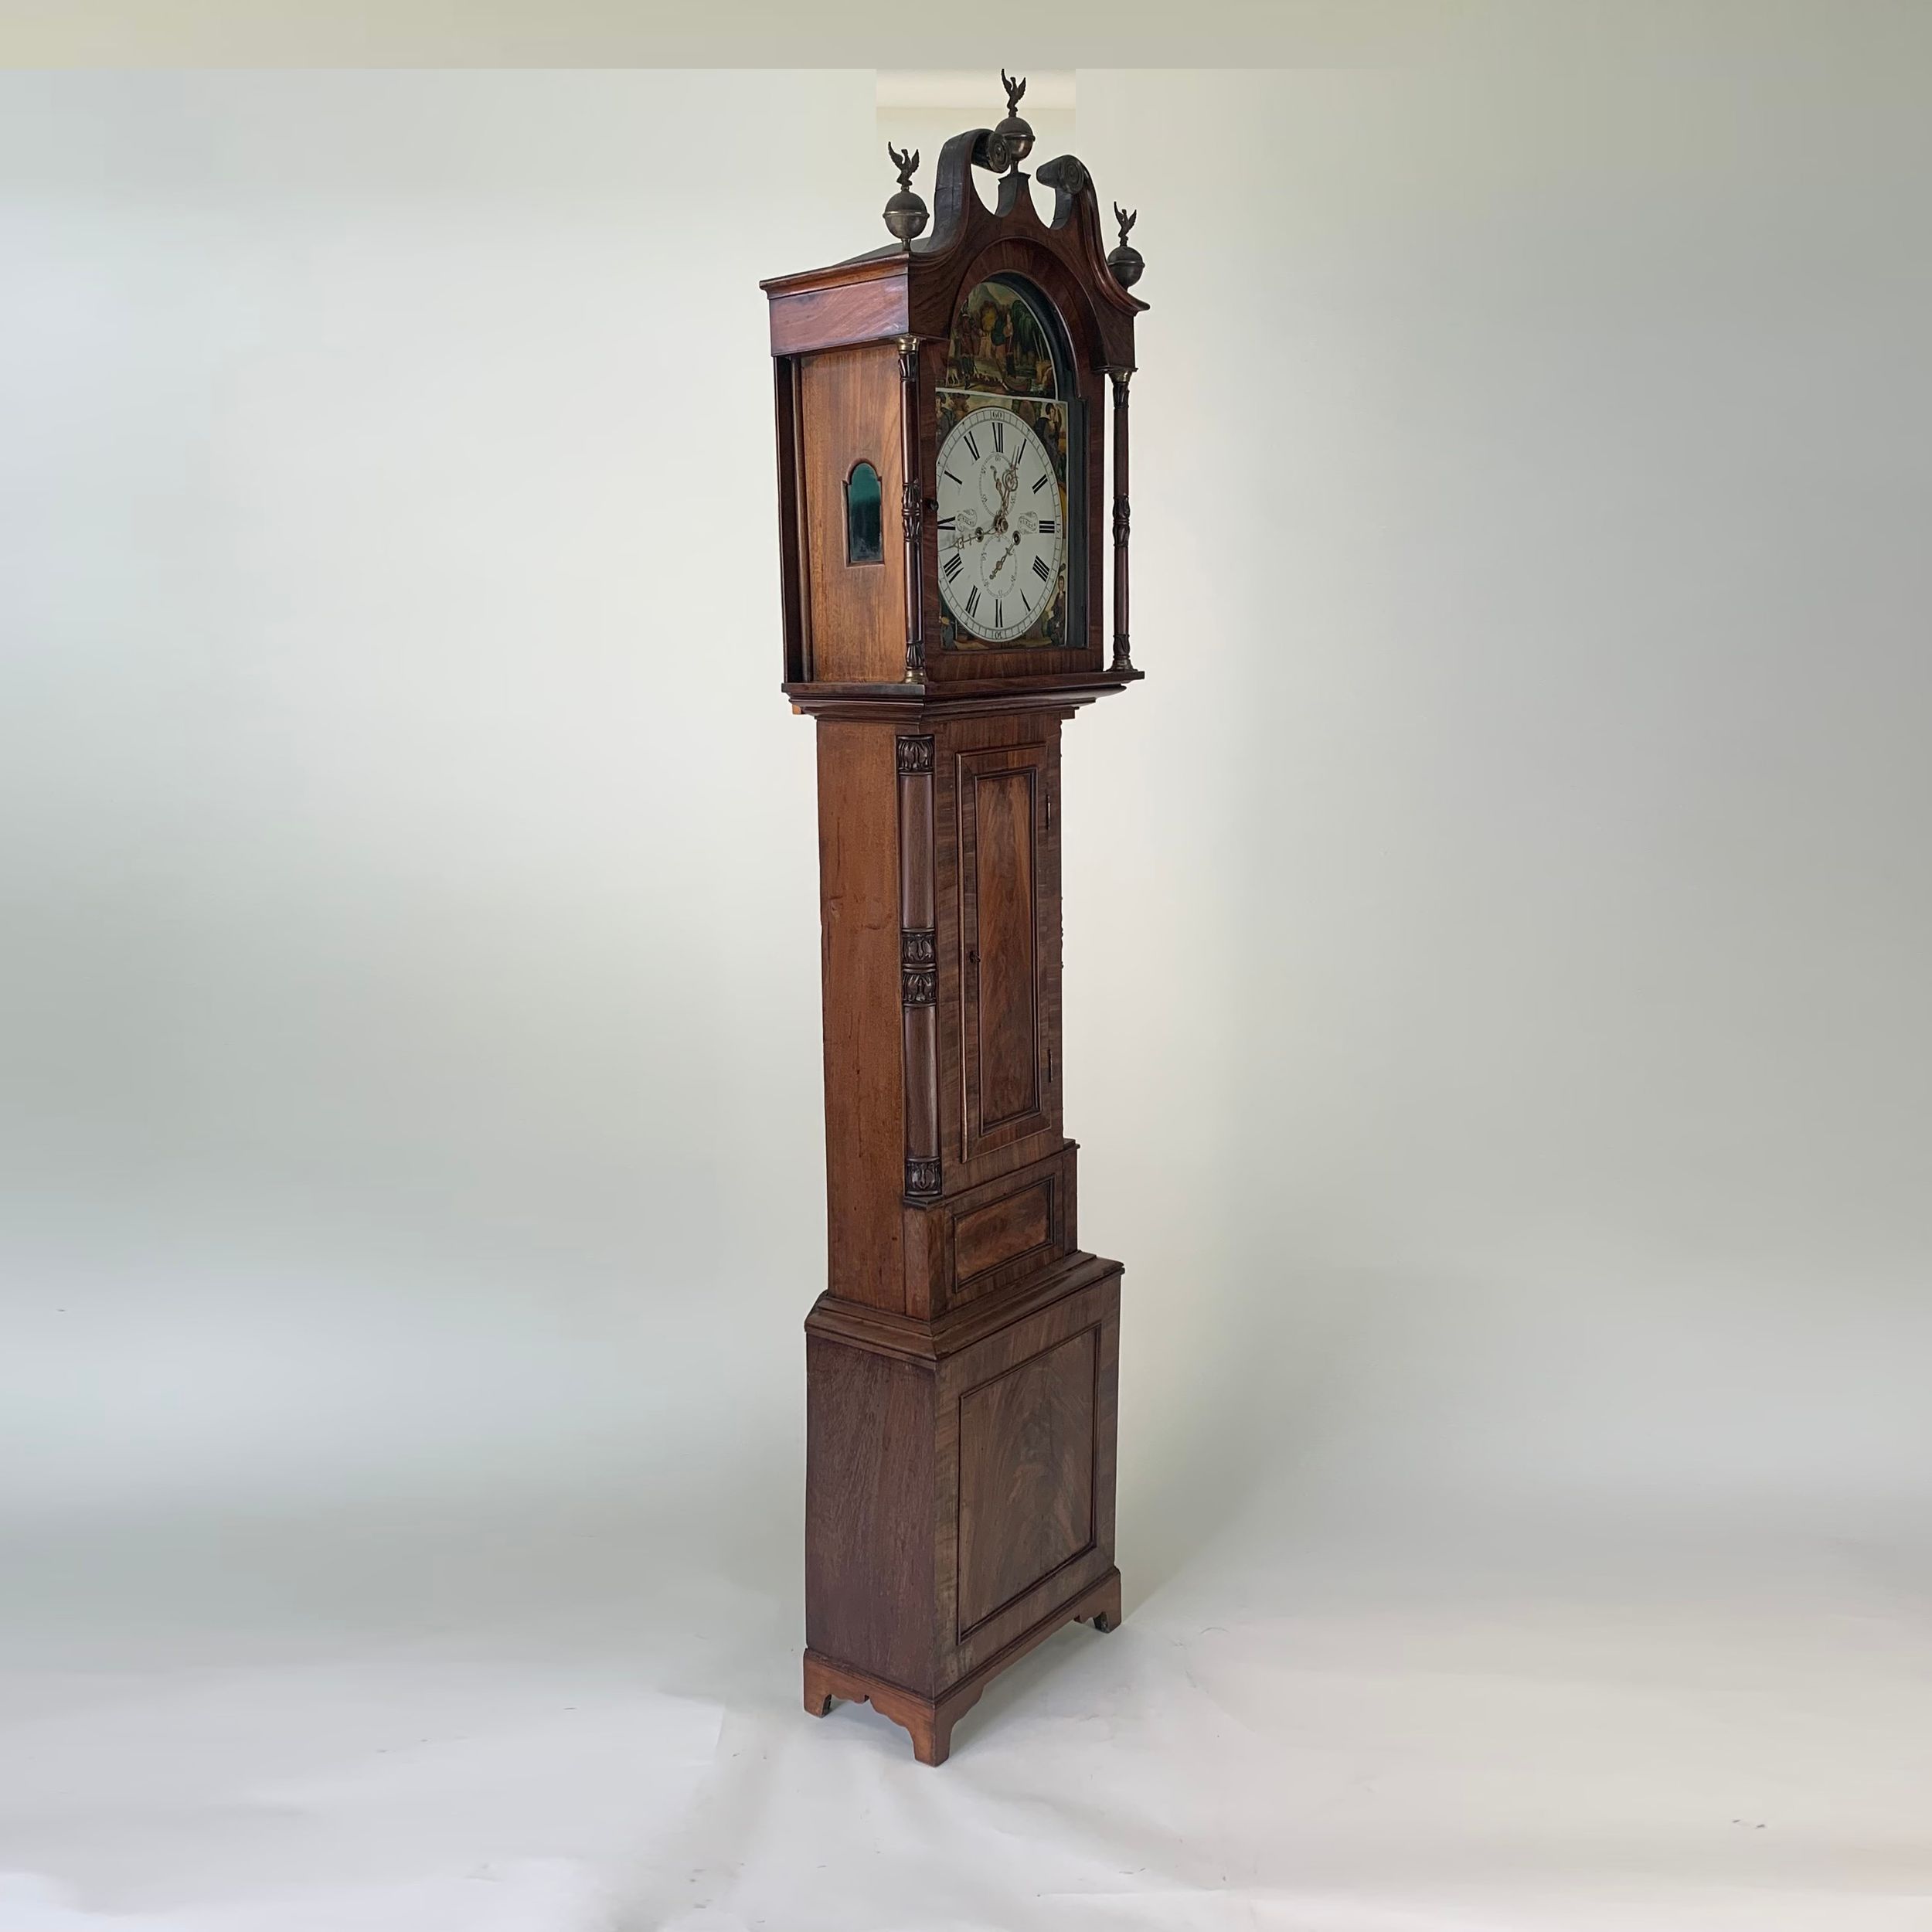 Scottish Longcase Clock by William Young, Dundee - Christopher Buck ...